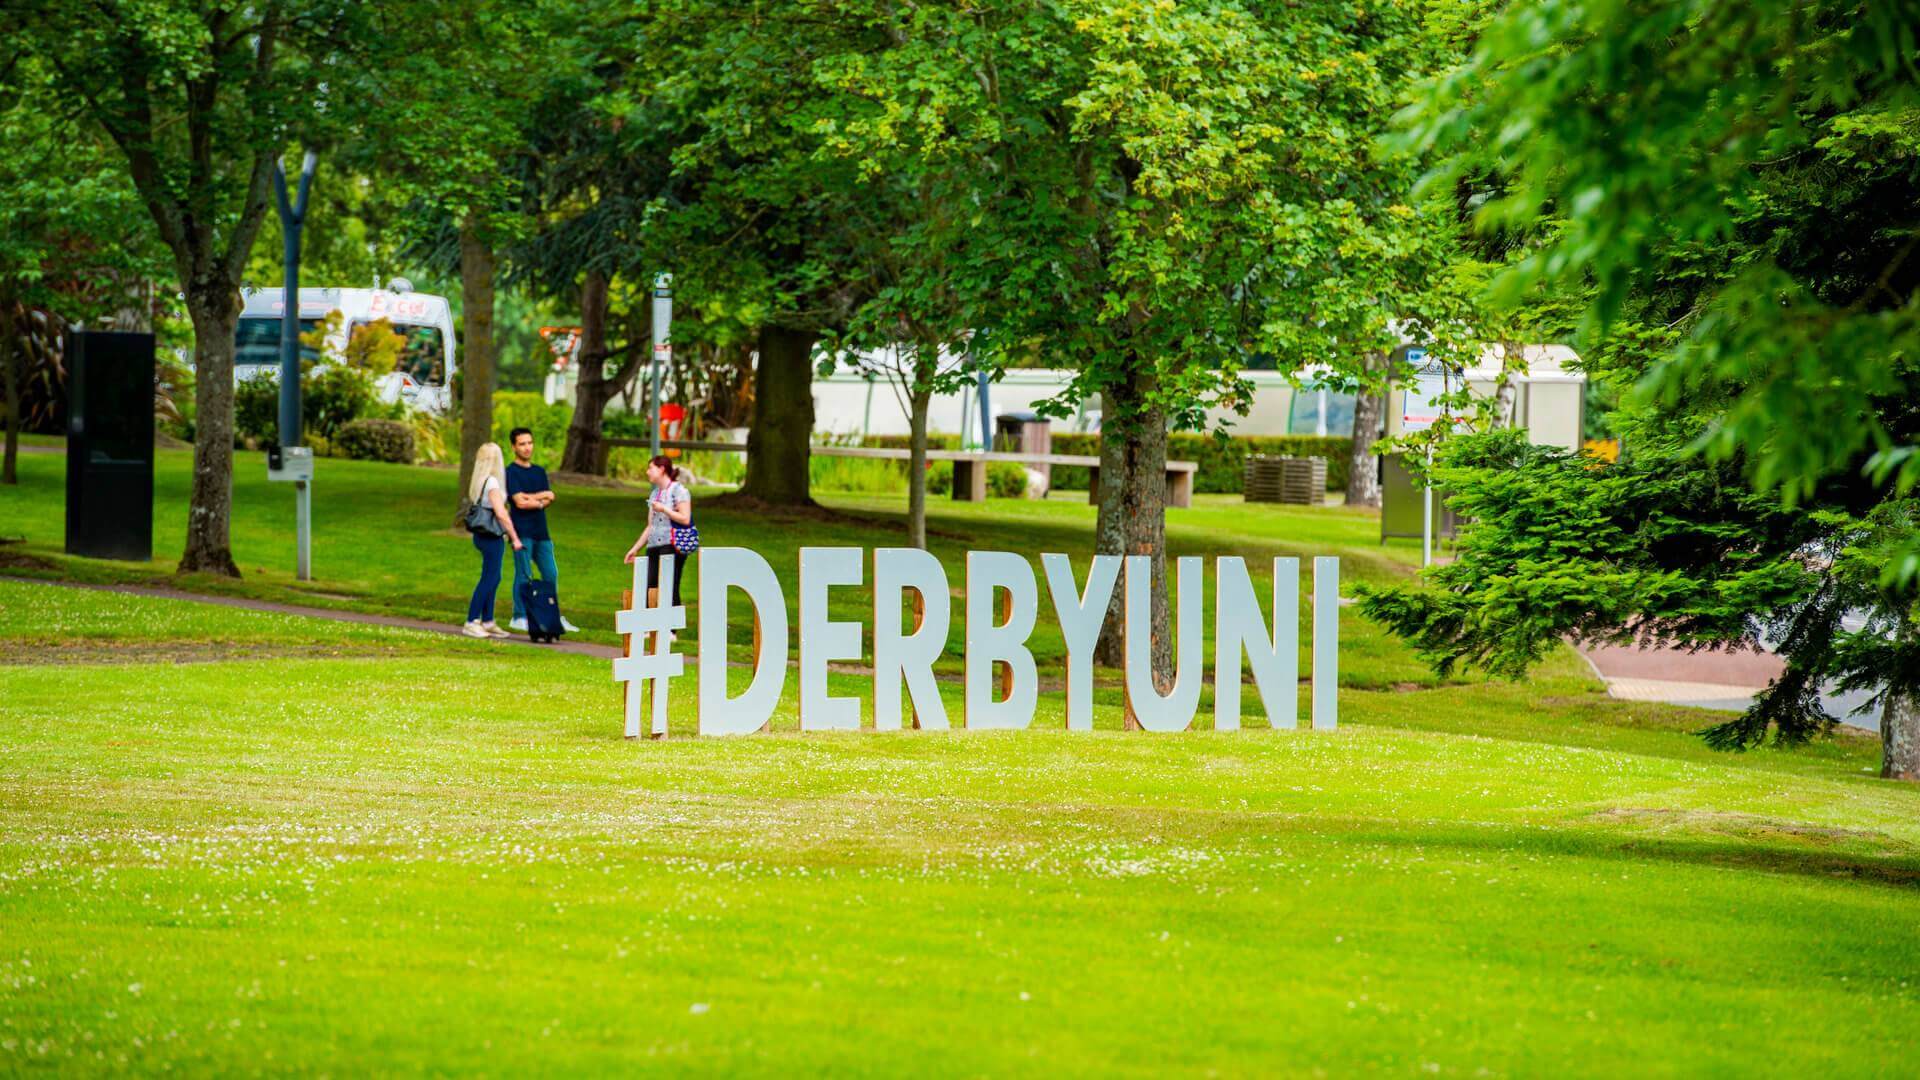 Image of University of Derby